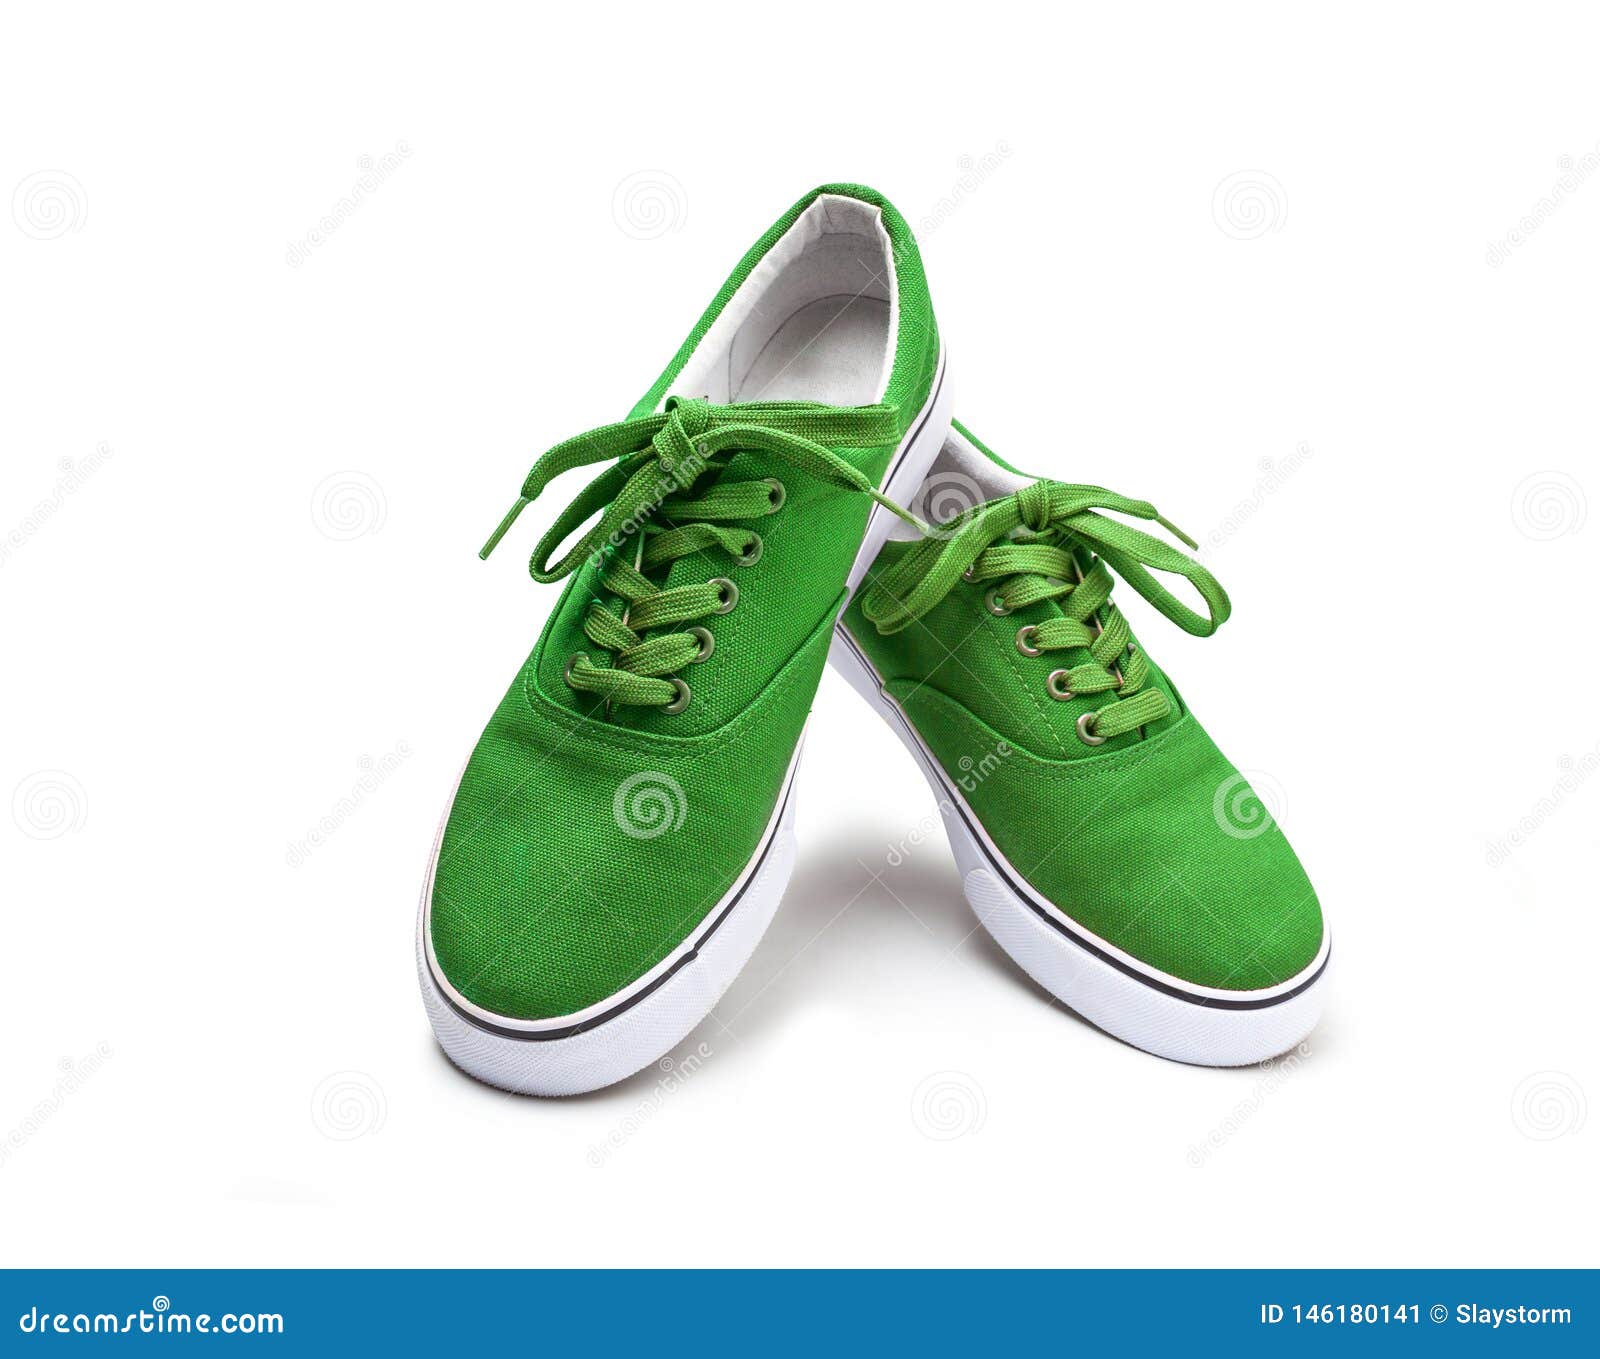 A Pair of Green Canvas Shoes Isolated on White Stock Image - Image of ...